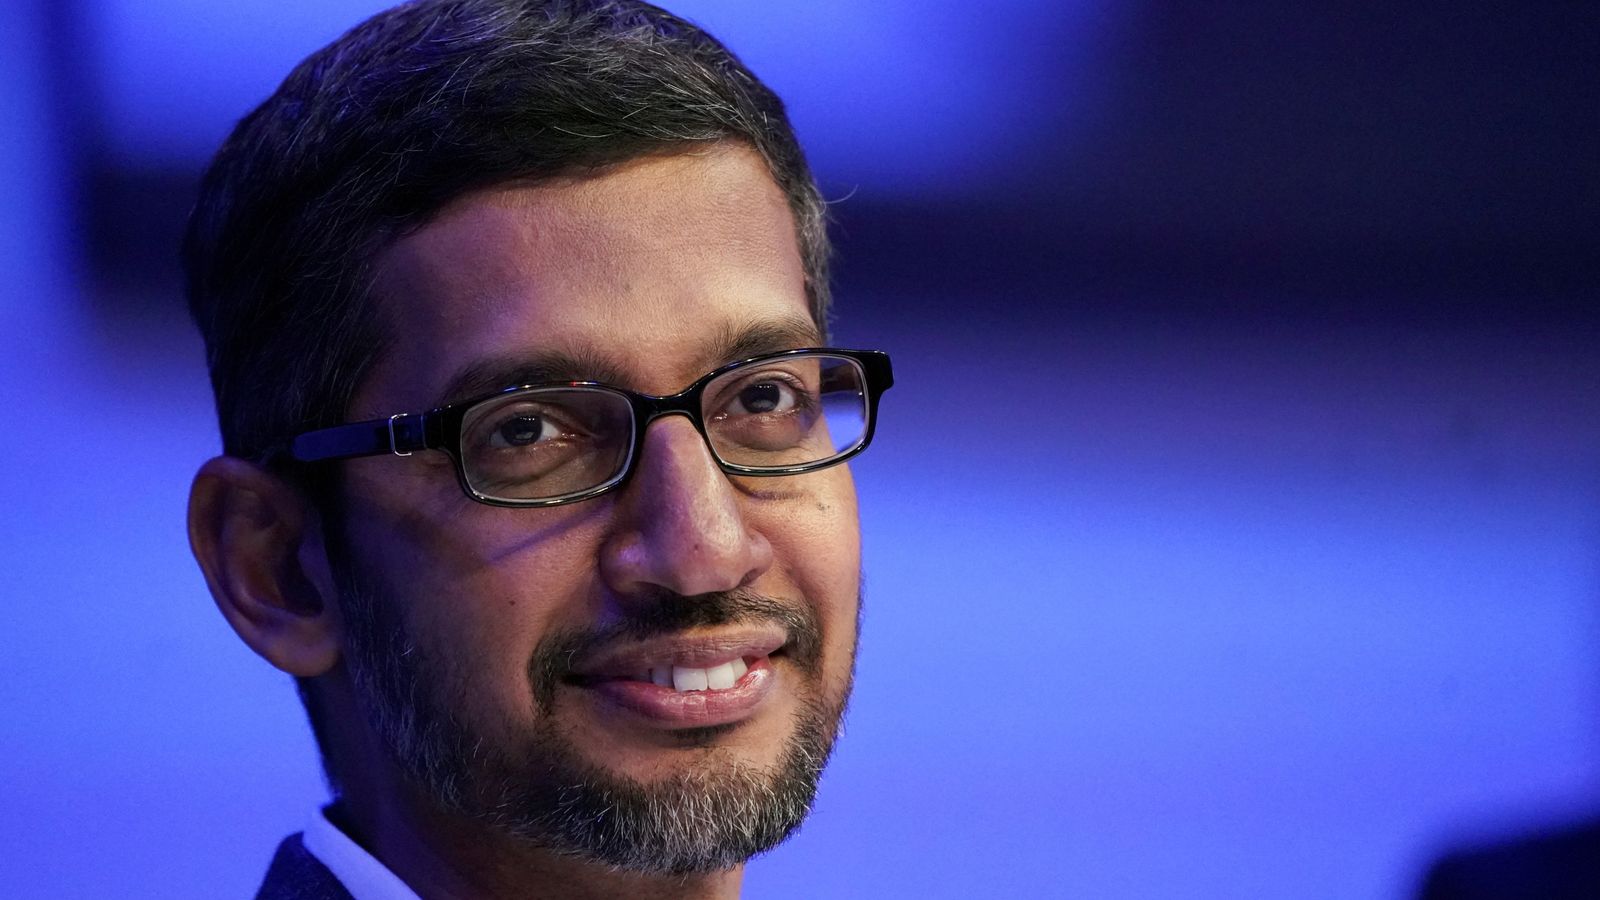 UK Prime Minister Meets with Google CEO to Discuss Future of Artificial Intelligence